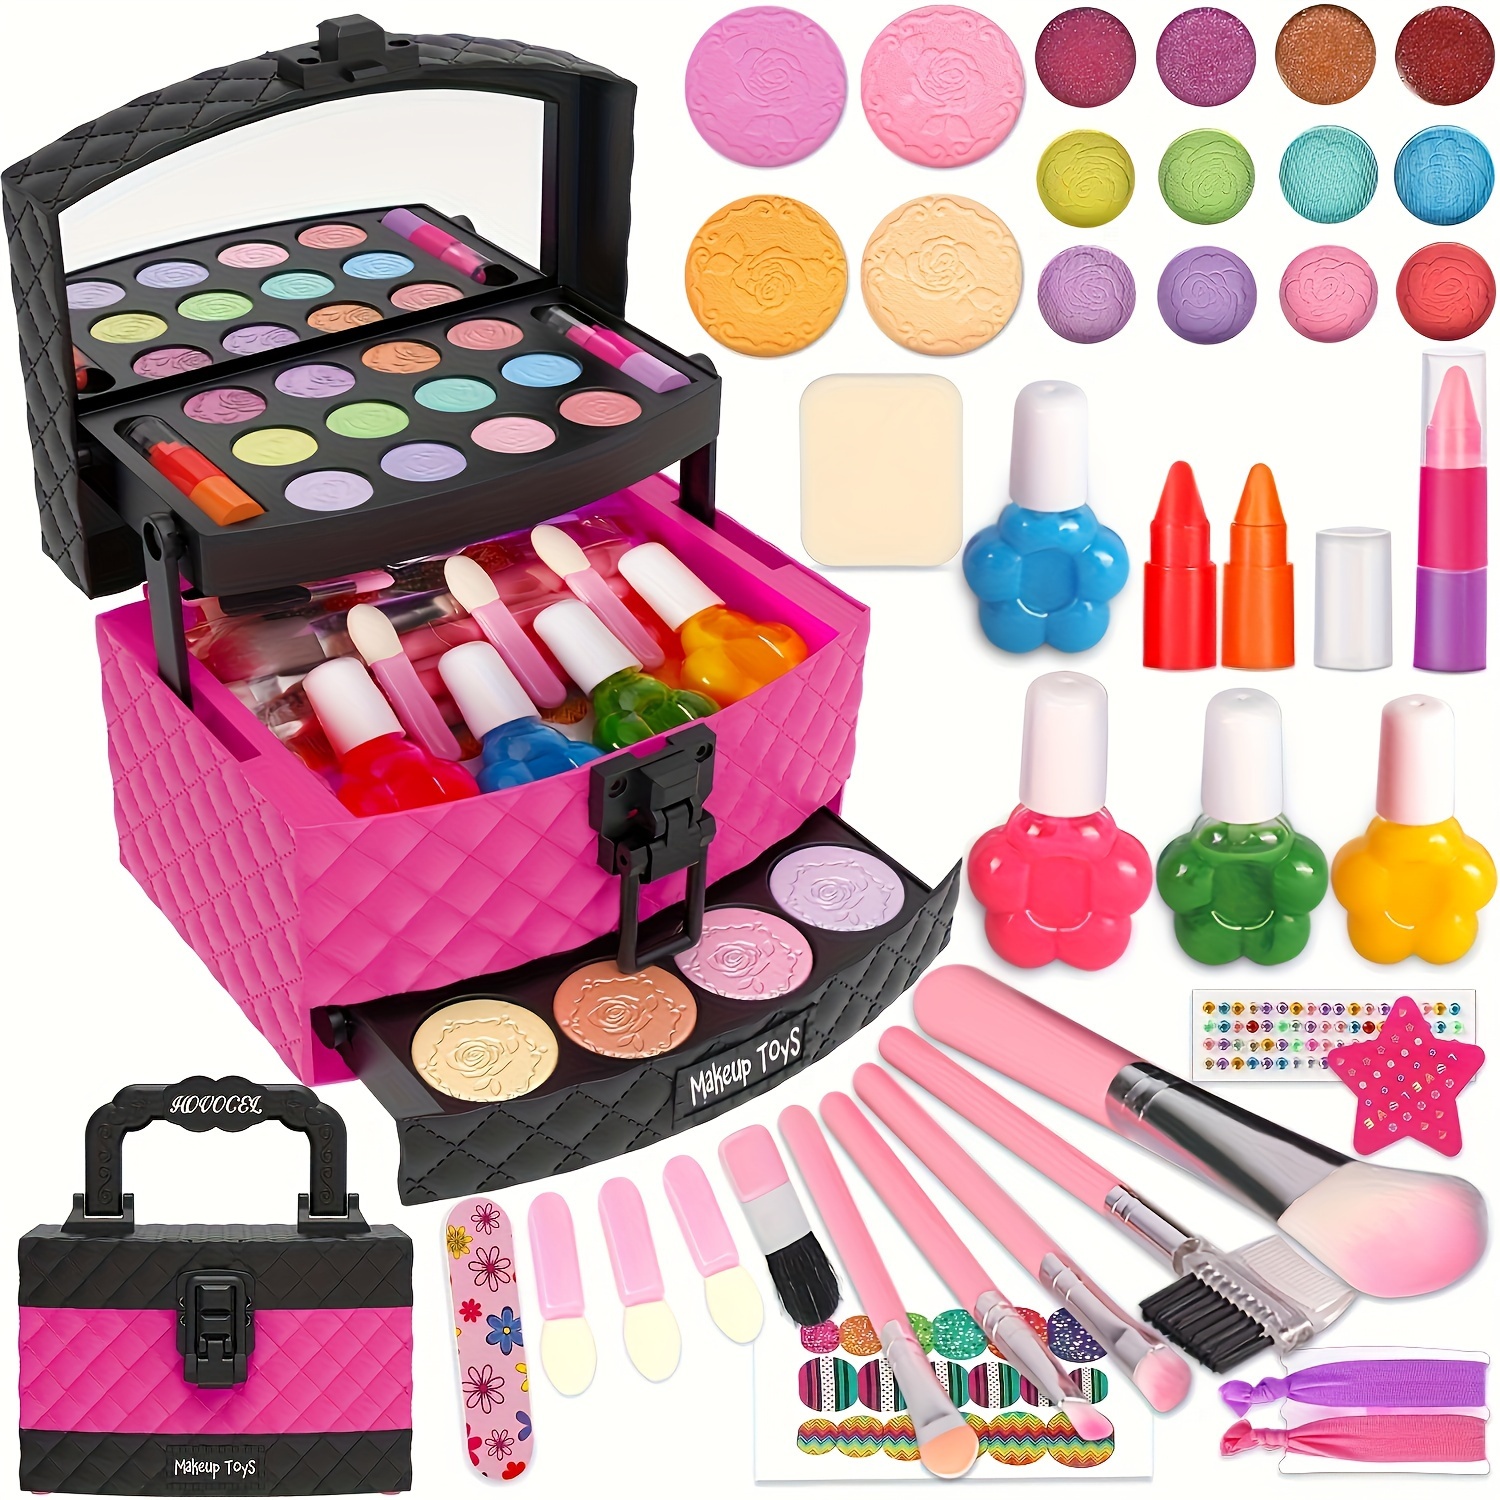 Big Mo's Toys Kids Beauty Makeup and Hair Salon Set, Girls Pretend Play Toy  with Cosmetic Bag, Hairdryer, Curling Iron, Blush Pallet with Mirror